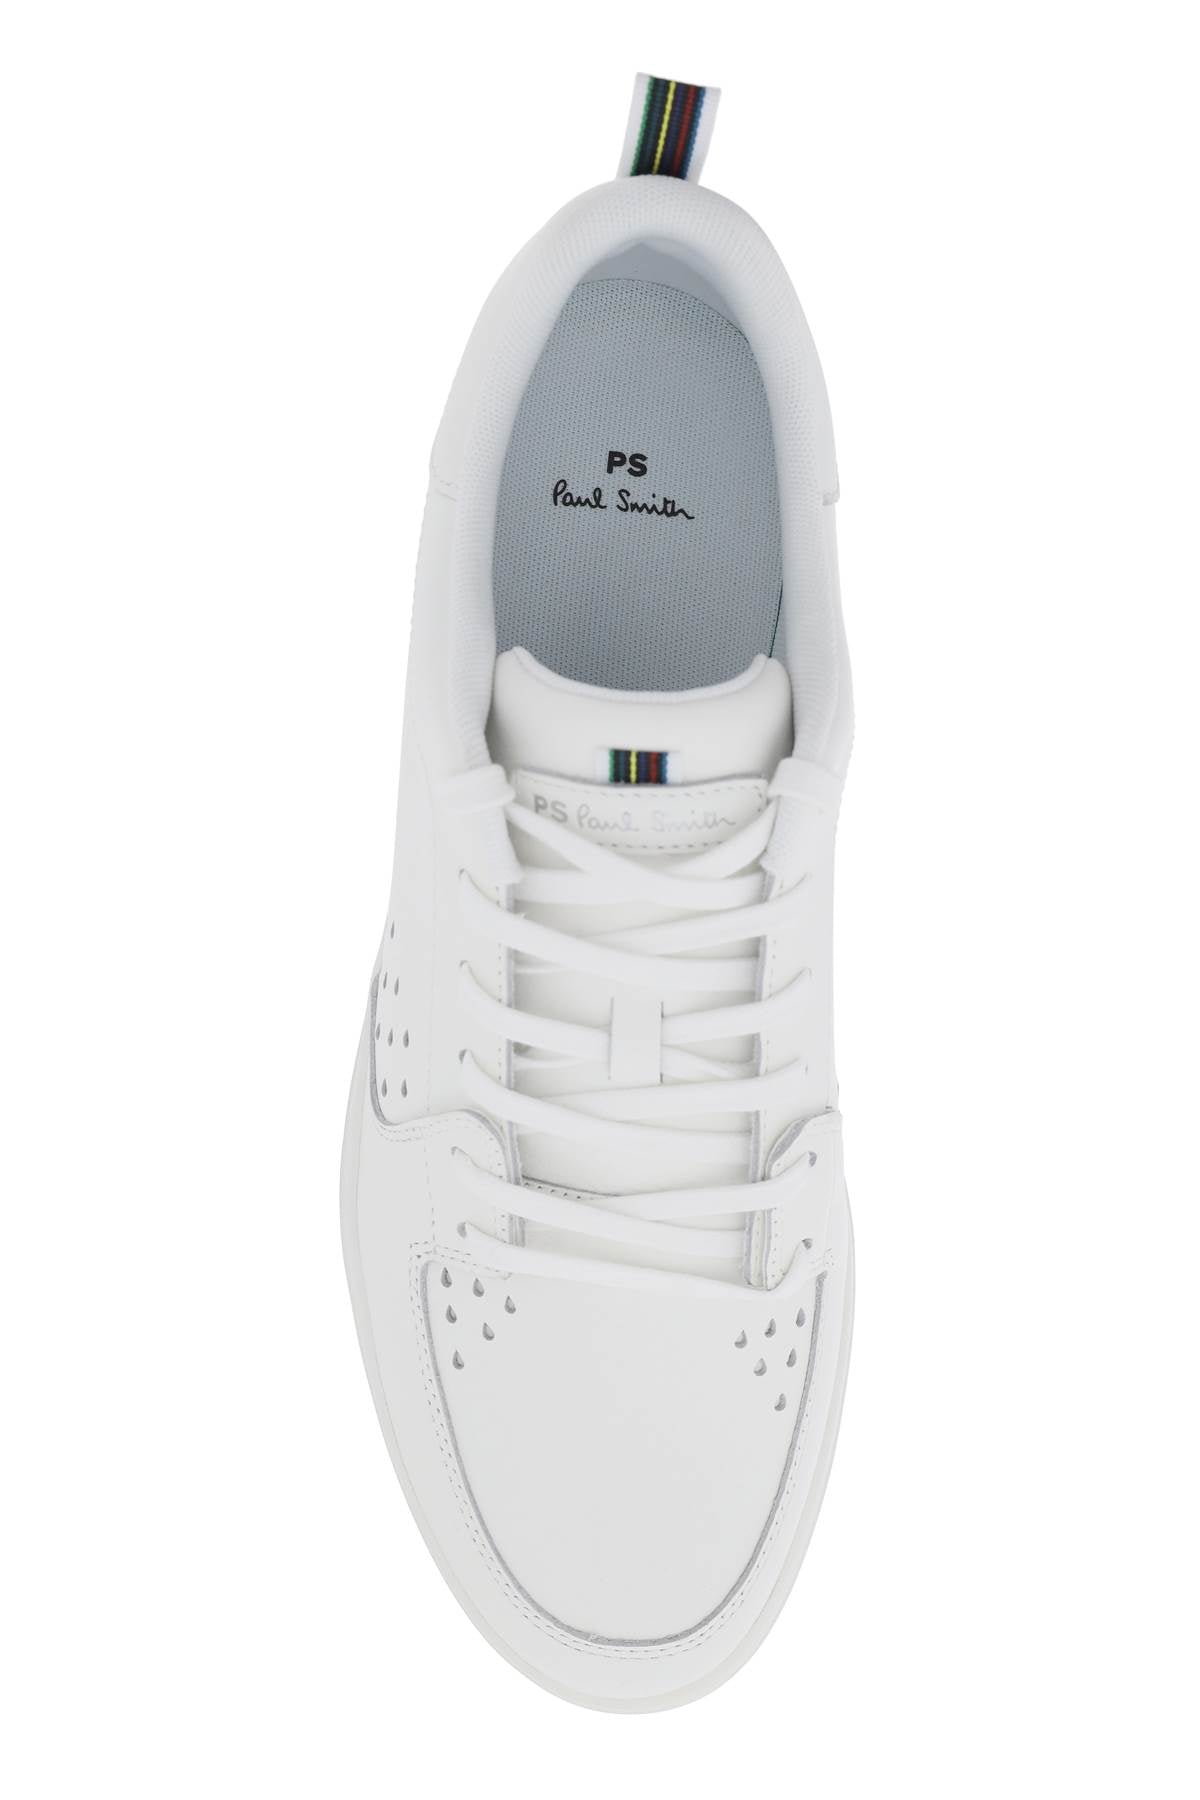 Ps paul smith premium leather cosmo sneakers in-1